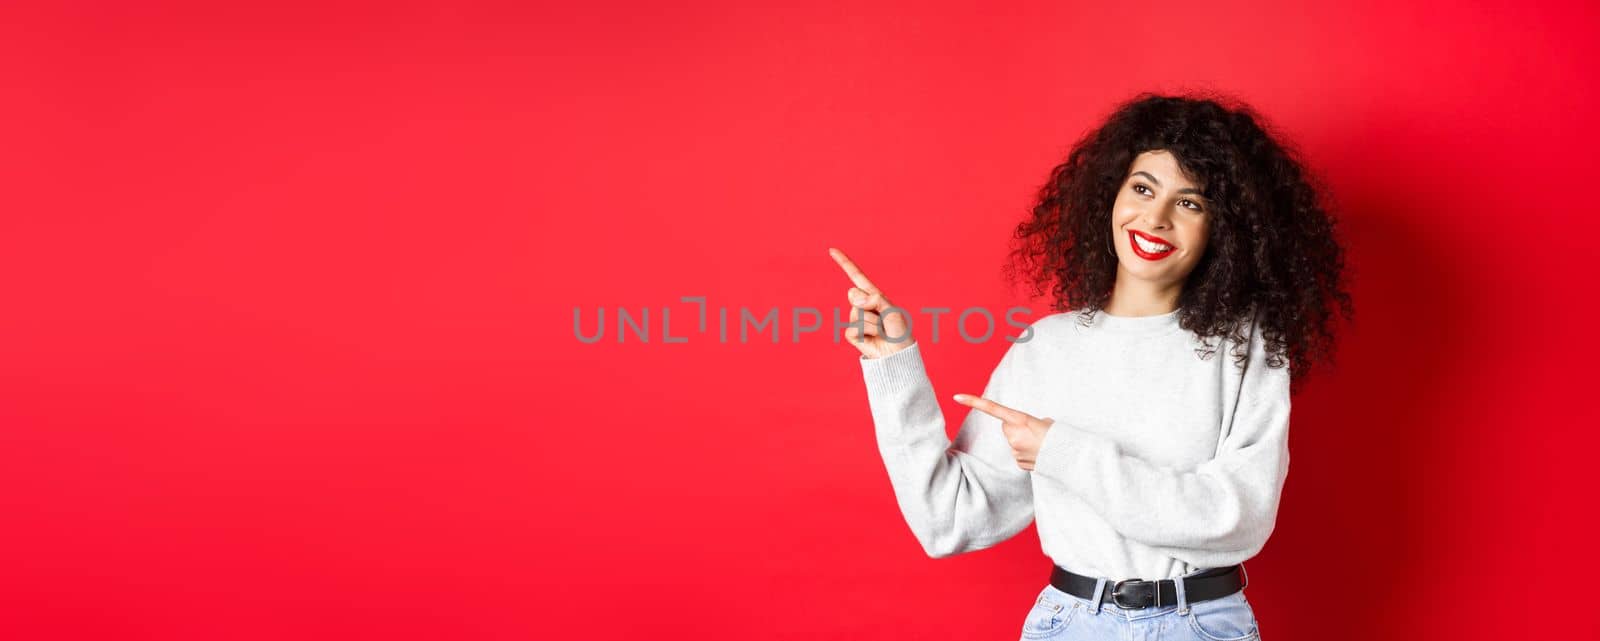 Beautiful european woman with curly hair and makeup, pointing fingers left and looking aside with dreamy smile, checking out promotion deal, red background.